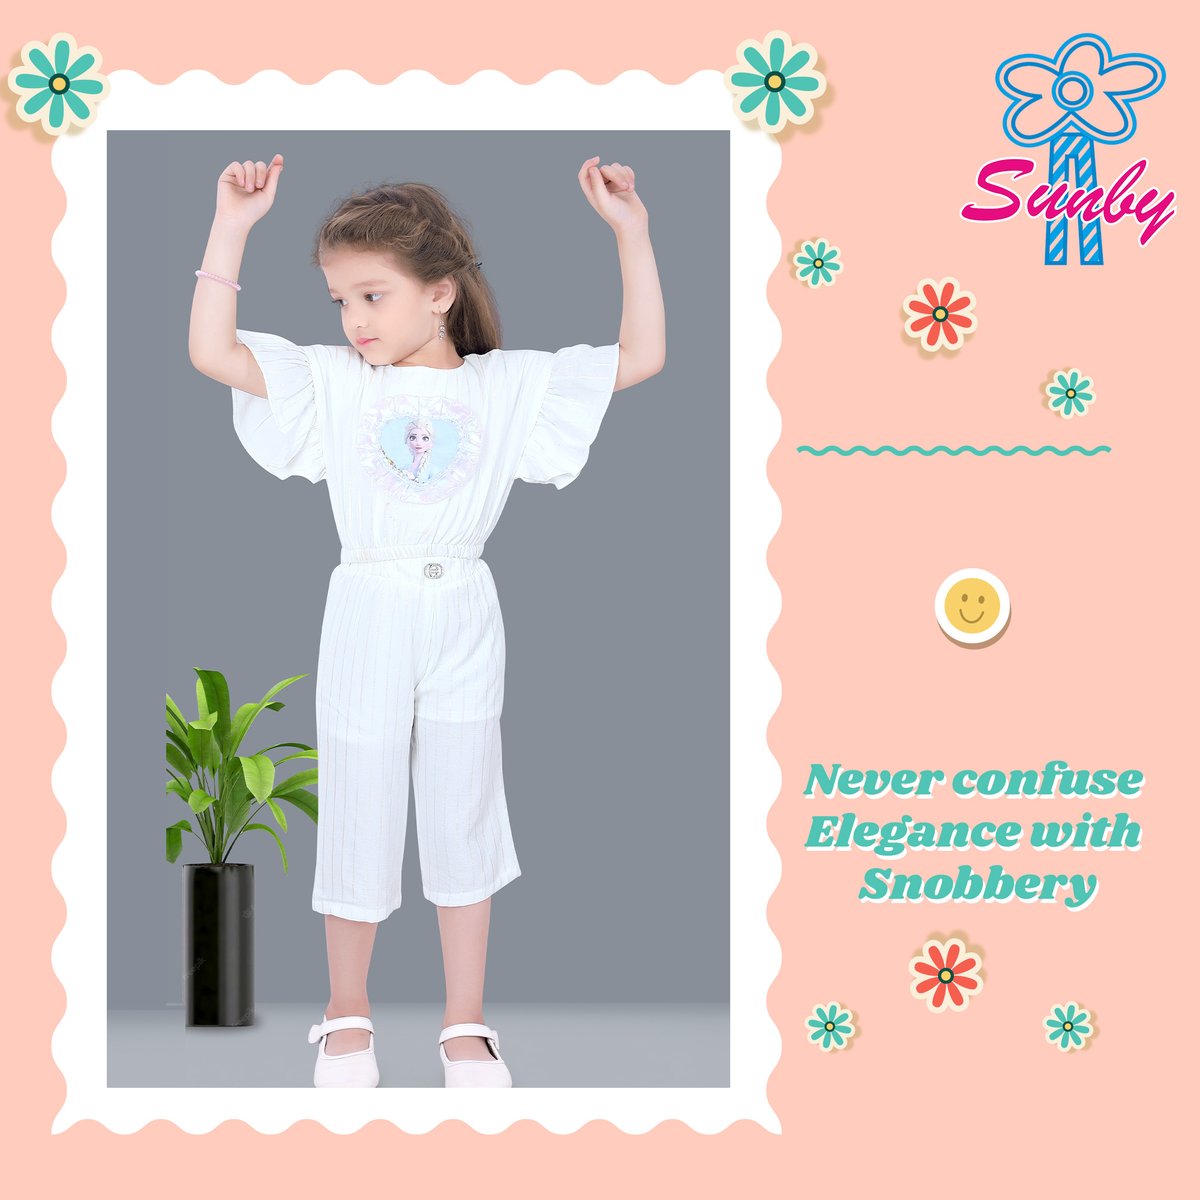 Never confuse elegance with sn0bbery

#WildWestKids #CowgirlStyle #WesternChic #YeehawFashion
#CowgirlCutie #WesternVibes #sunby #sunbyclothing #FashionableKids